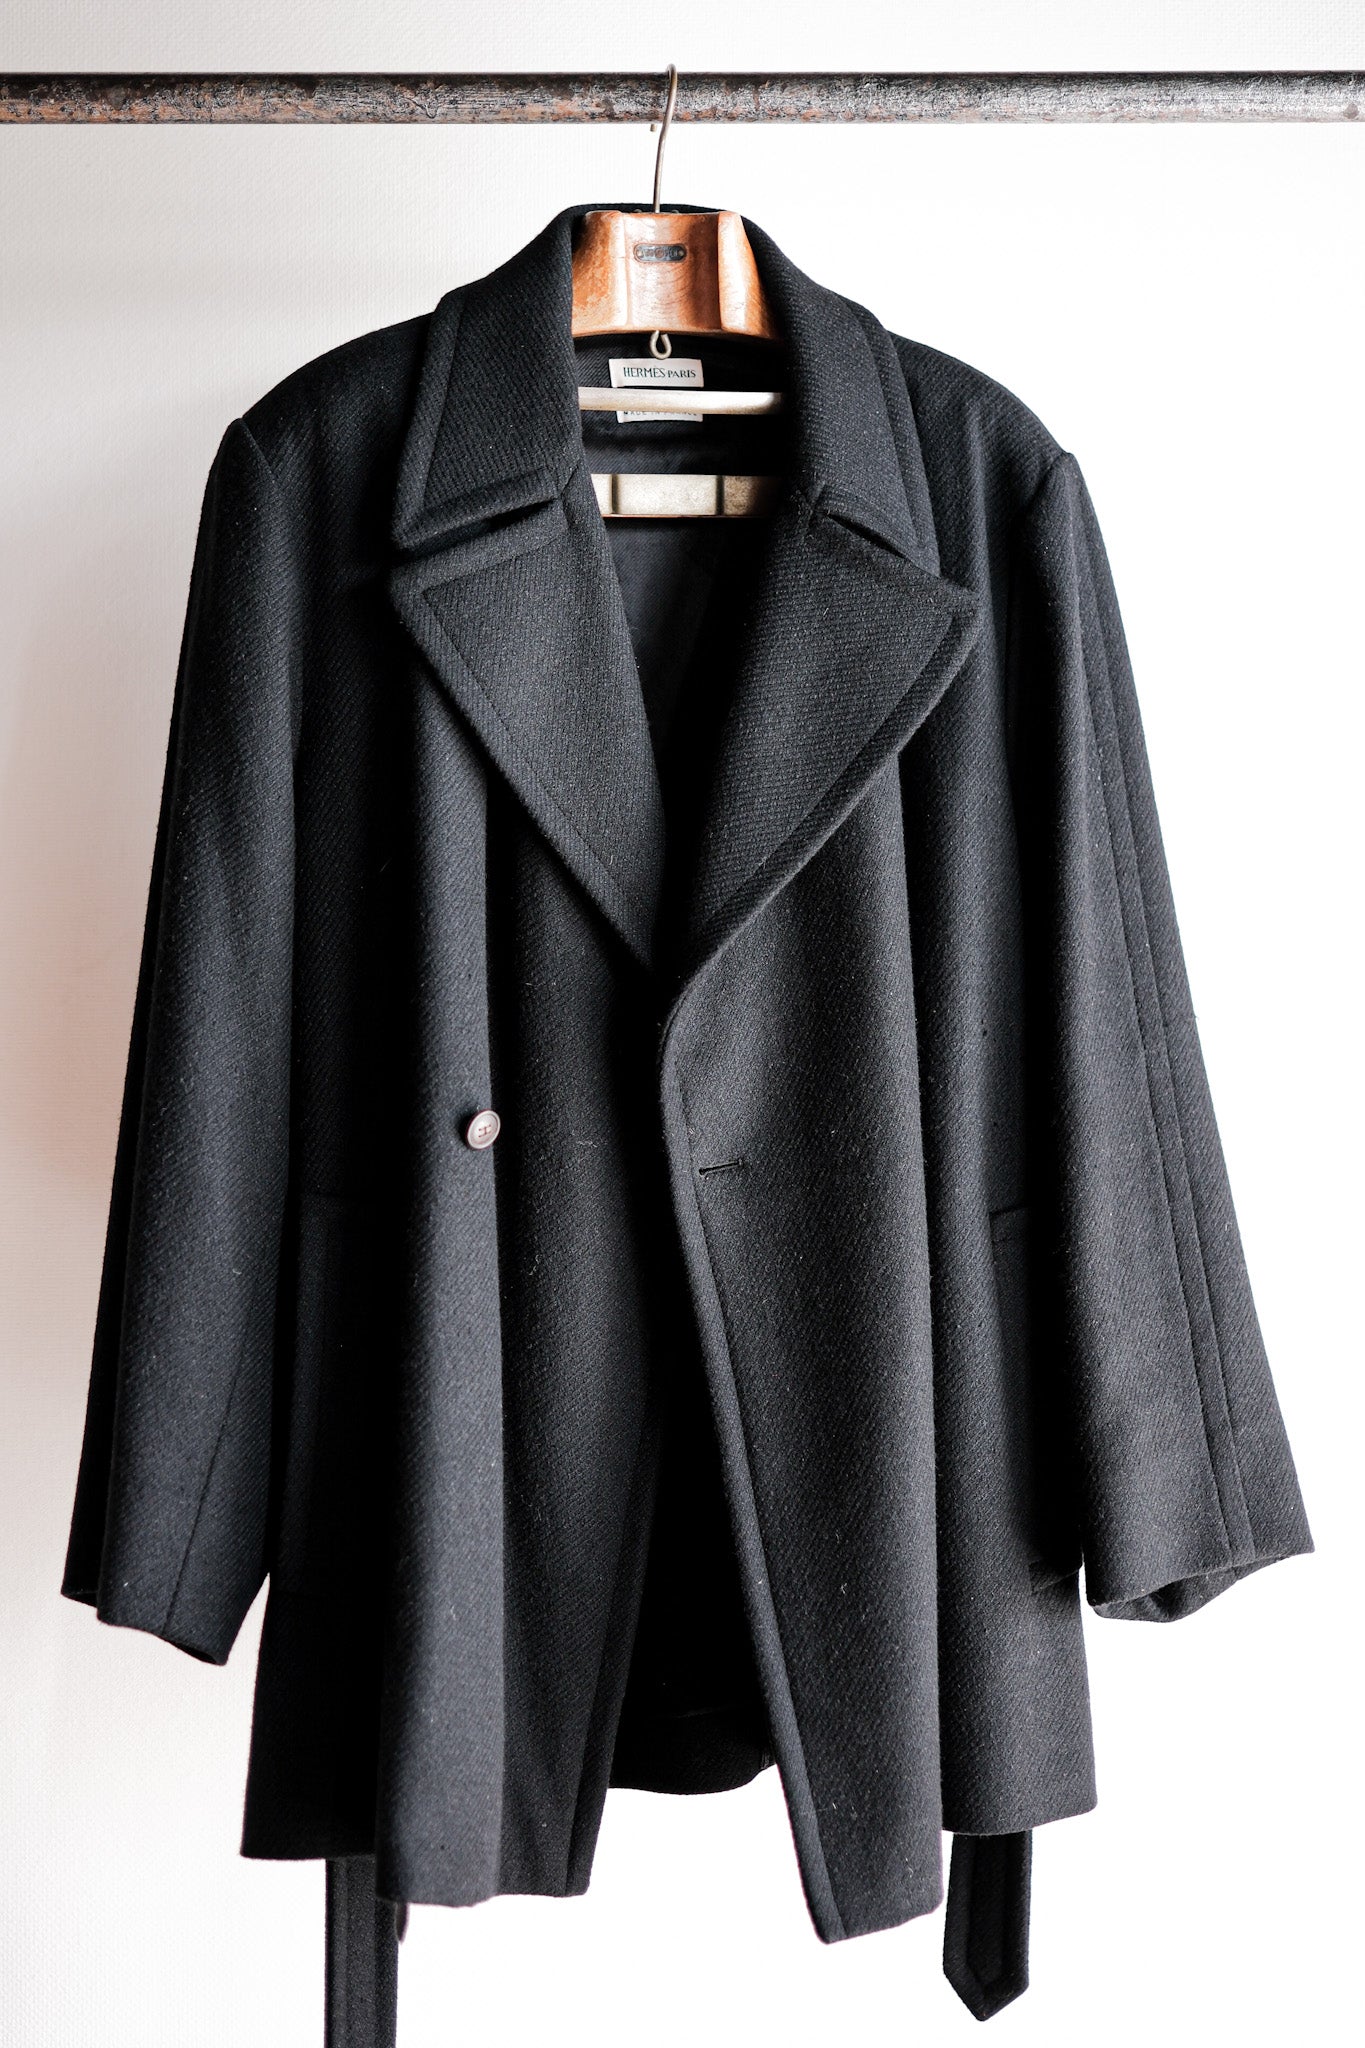 00's】Old Hermès Paris Cashmere Mix Wool Belted Coat by Martin Margie